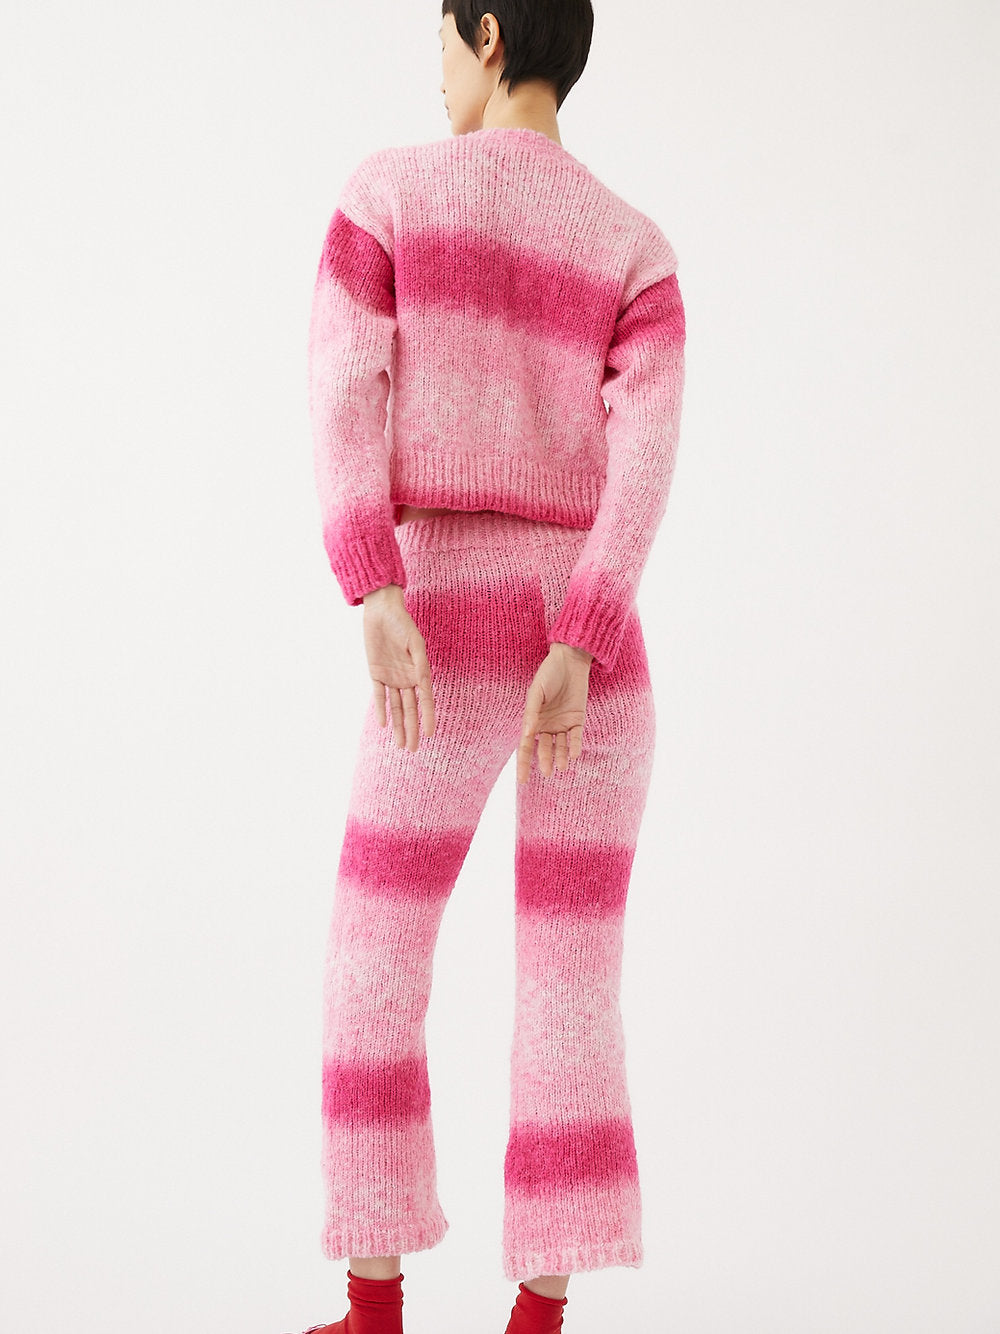 Anto Knit Pants in Ombre Pink